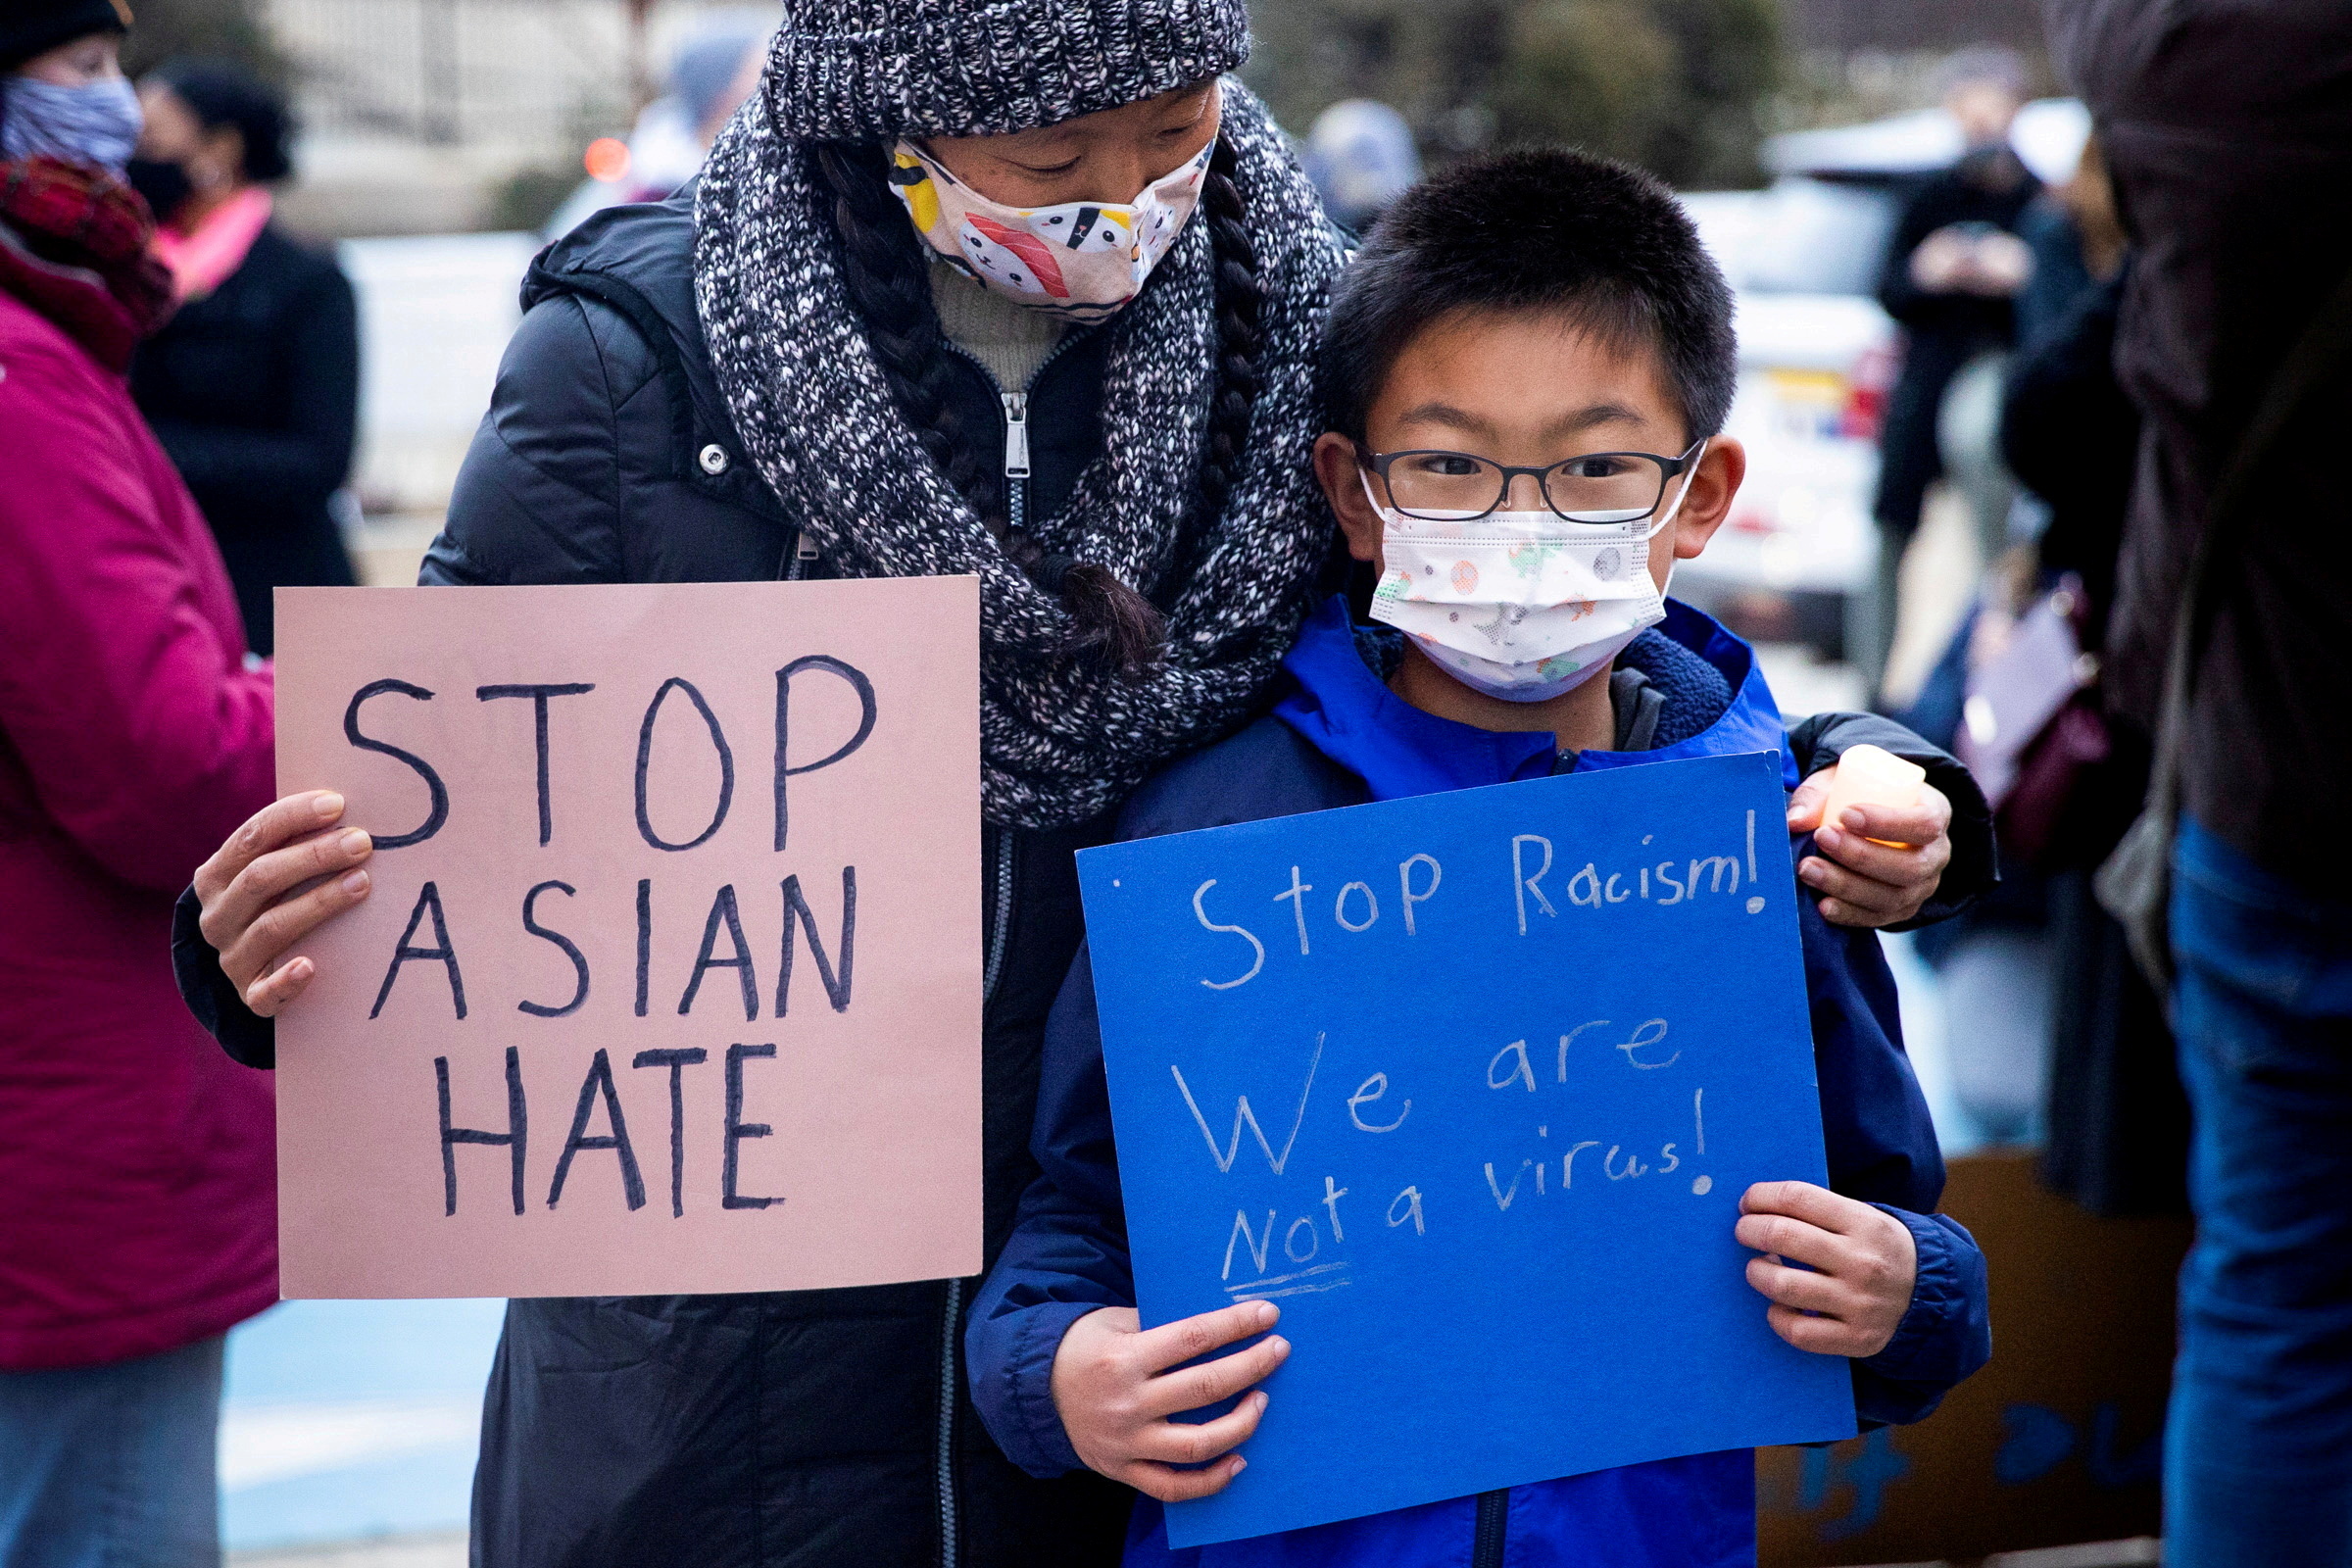 Vigil in solidarity with the Asian American community